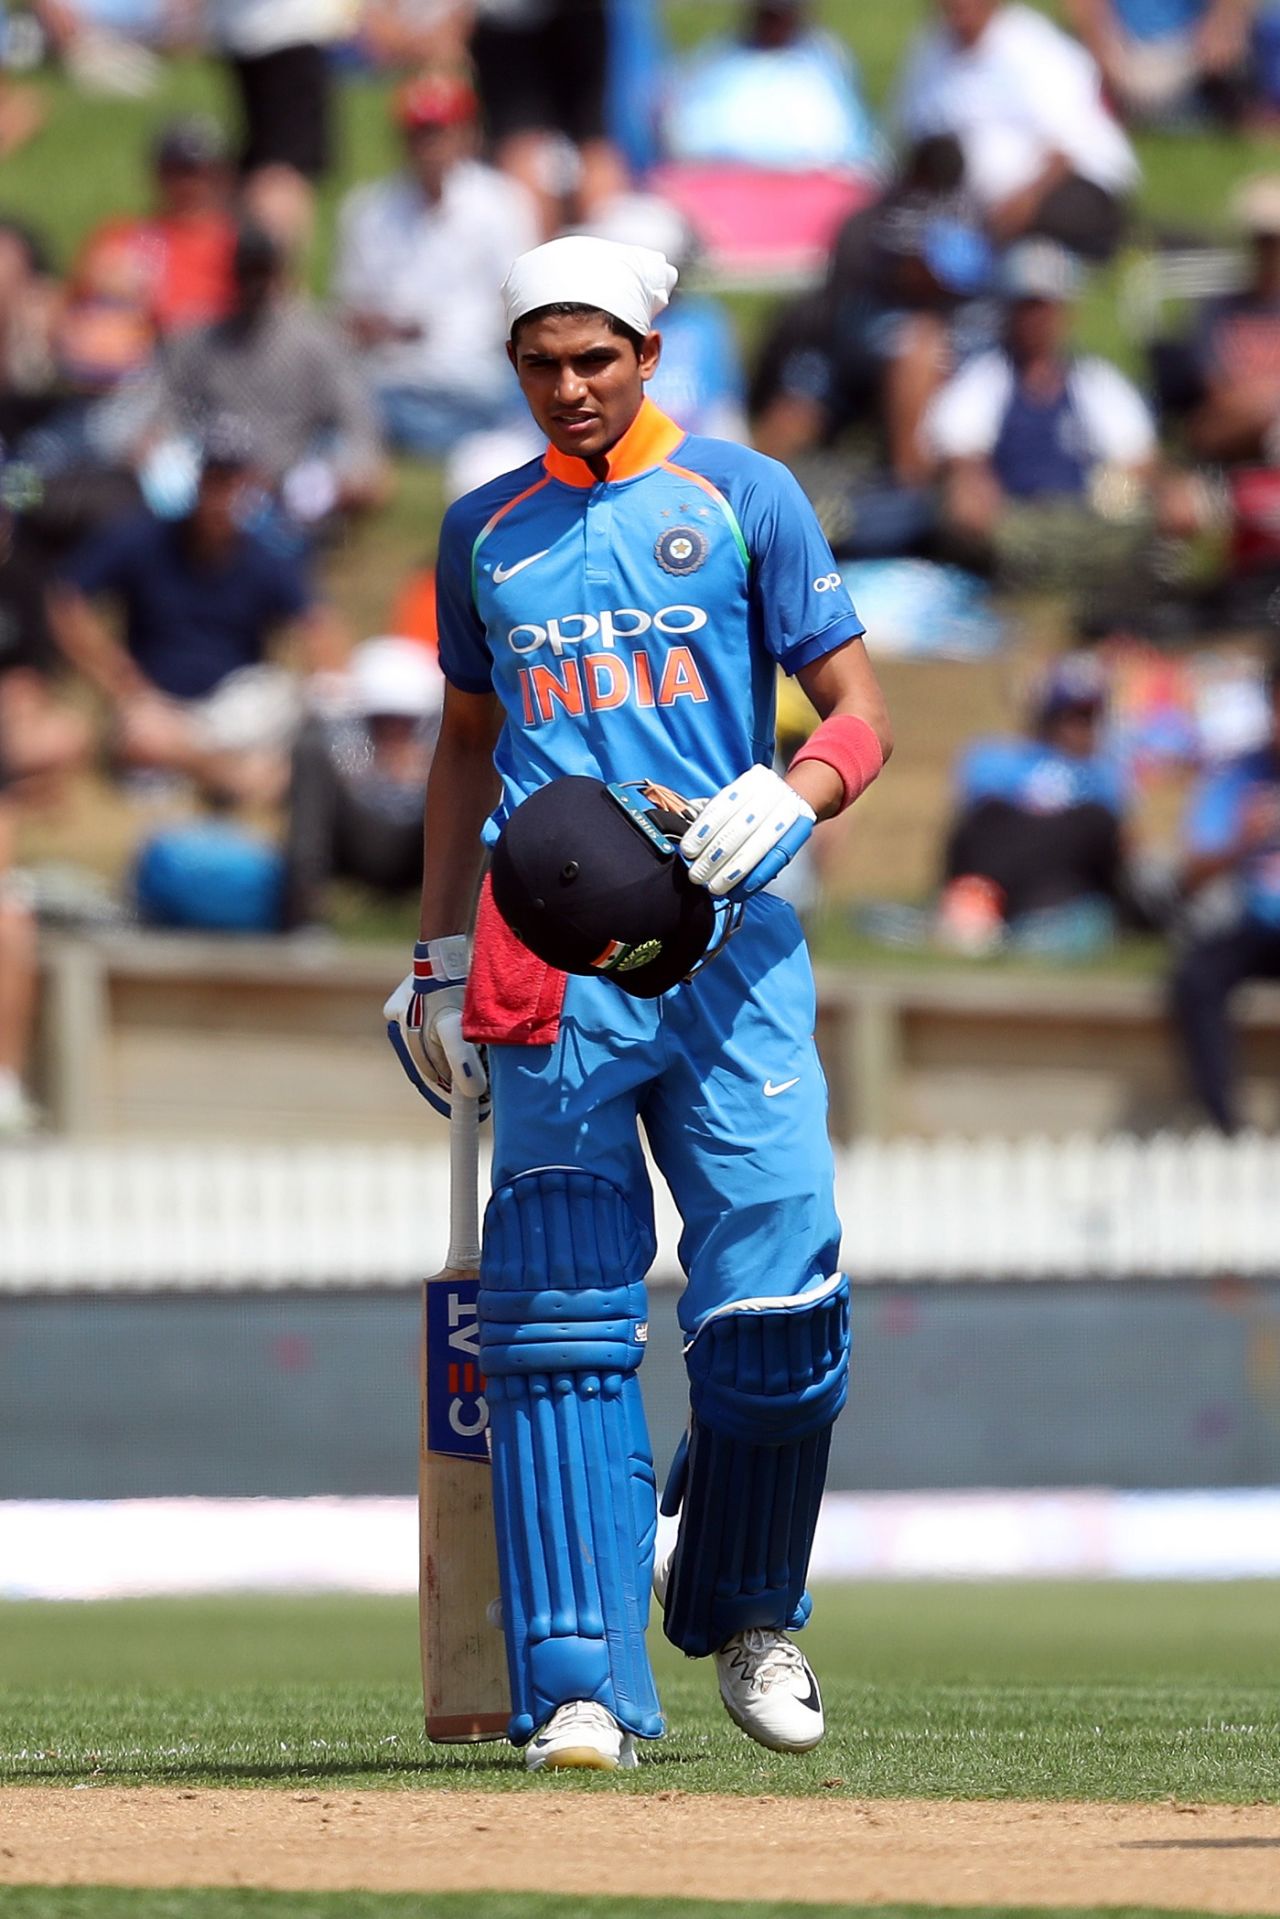 Shubman Gill reacts after being hit on the helmet, New Zealand v India, 4th ODI, Hamilton, January 31, 2019